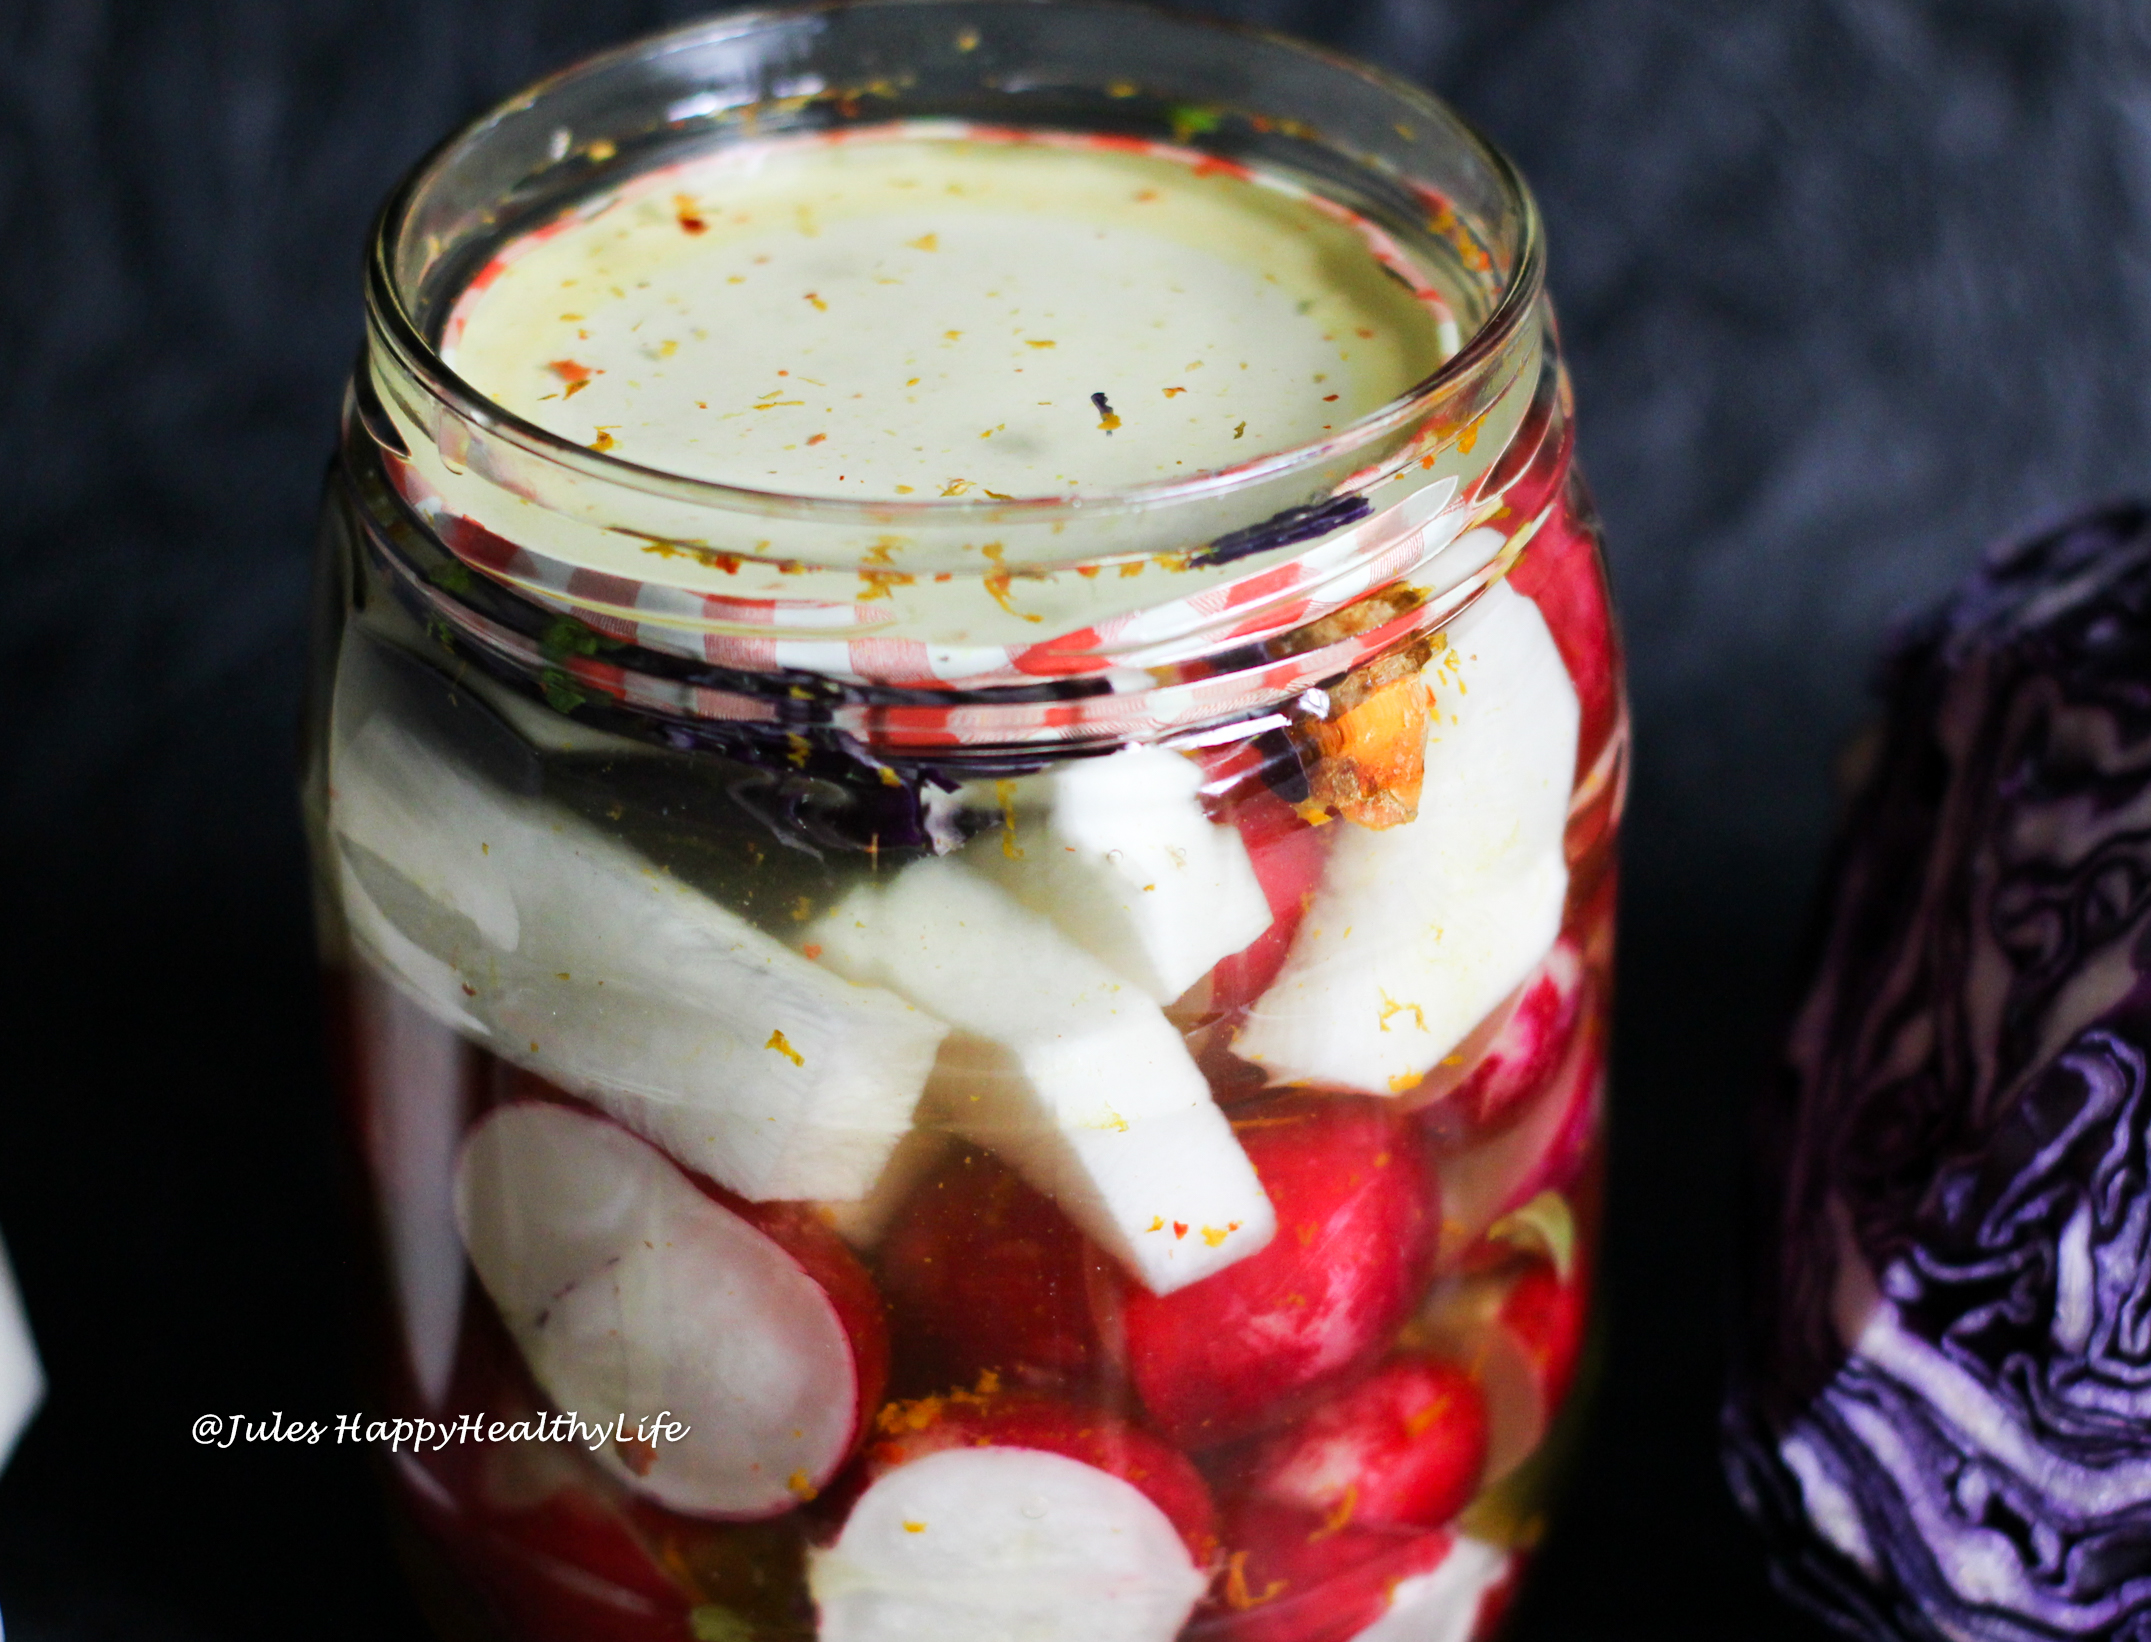 Fermenting vegetables is very easy and a fun way to preserve them 